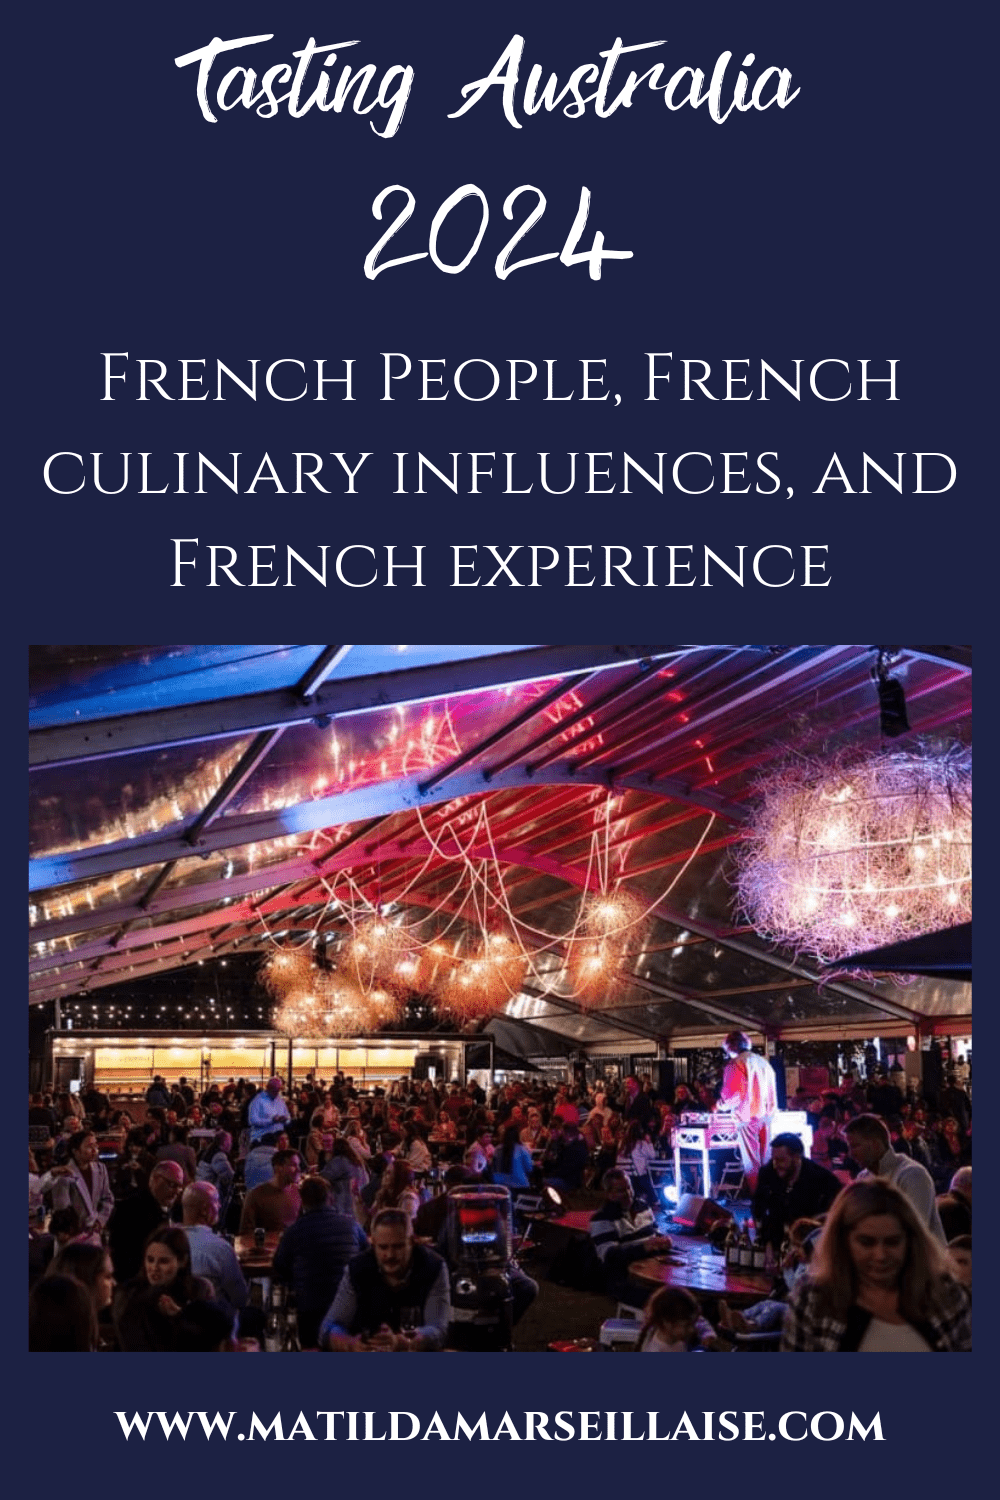 French people, French culinary influences and French experience at Tasting Australia 2024